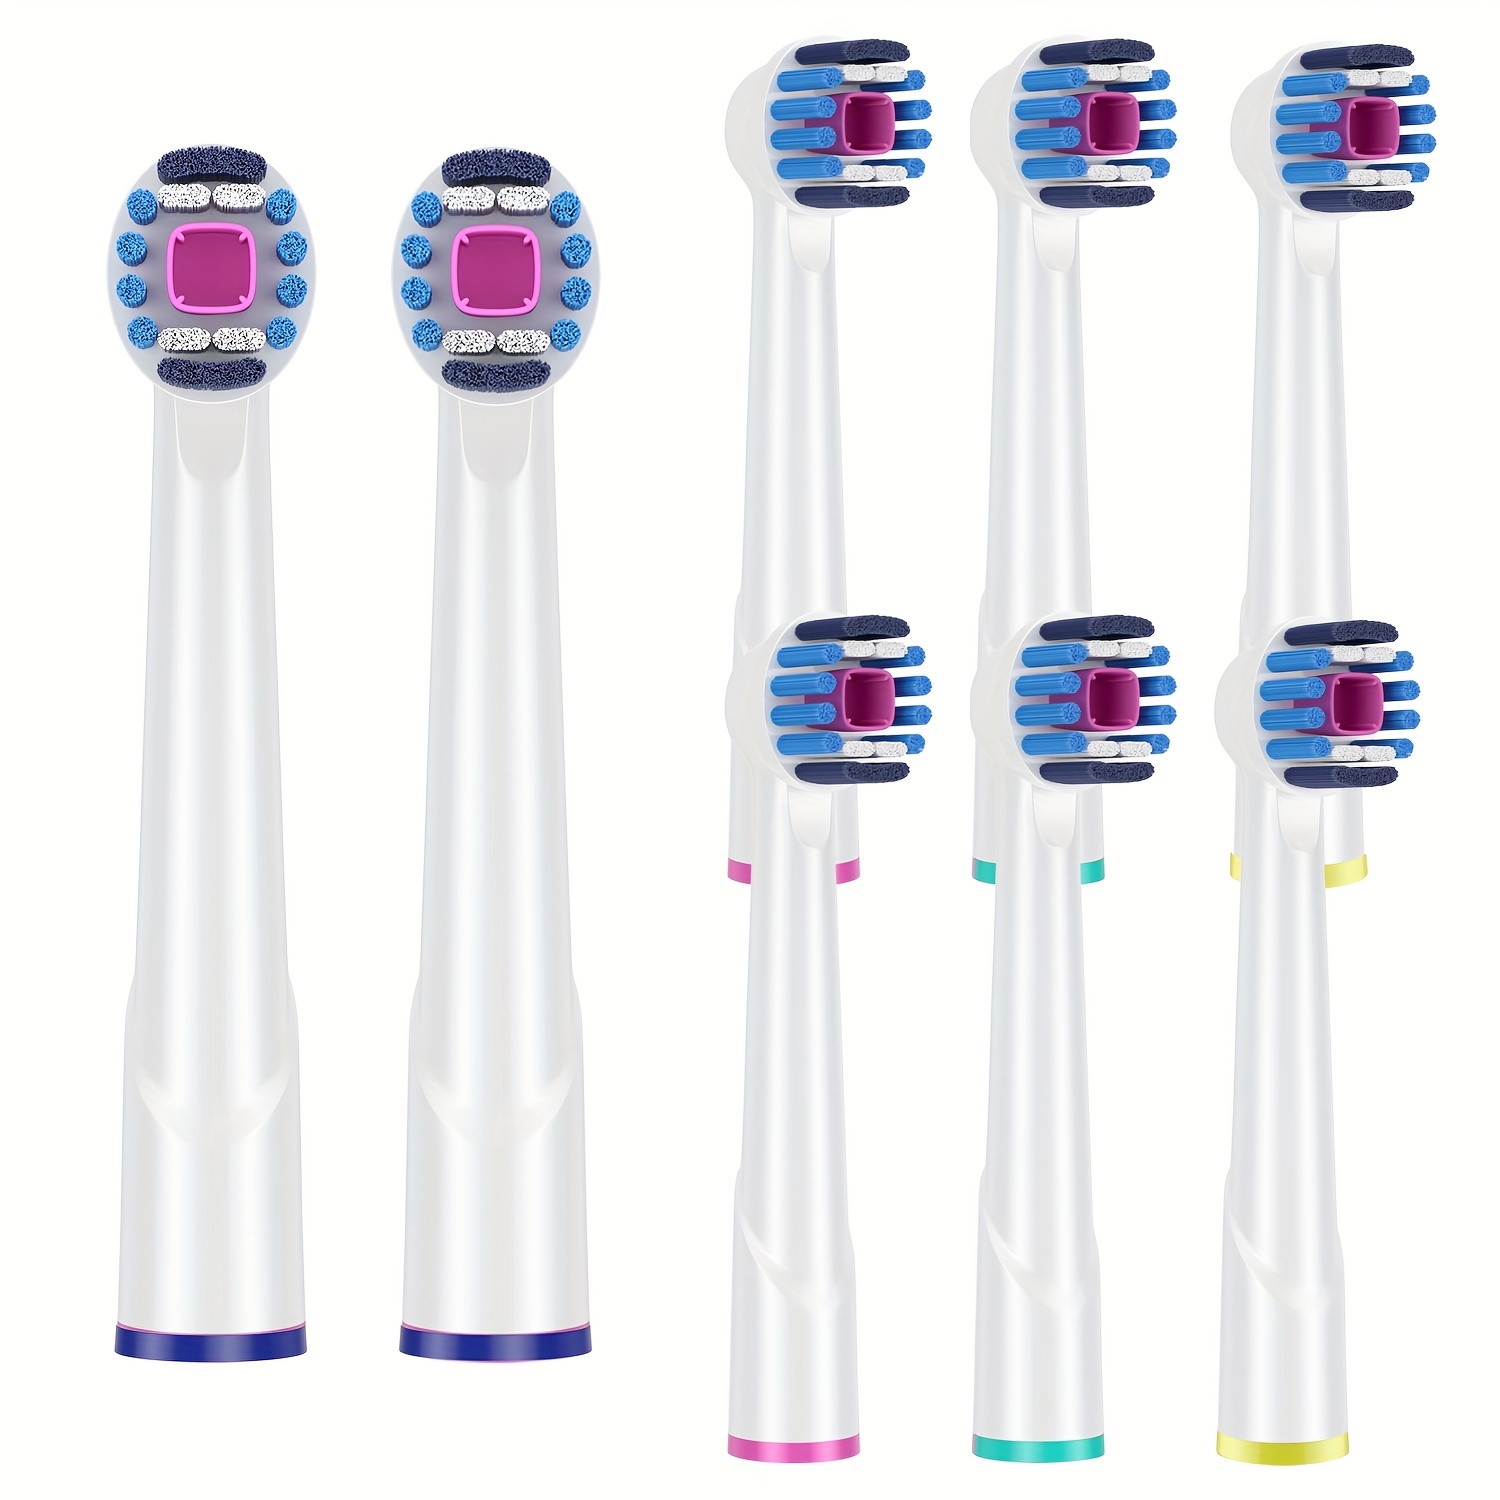 4pcs/8pcs Professional Electric Toothbrush Heads Compatible With Oral-B *  Electric Toothbrush - Replacement Brush Heads For 3D White Toothbrush He